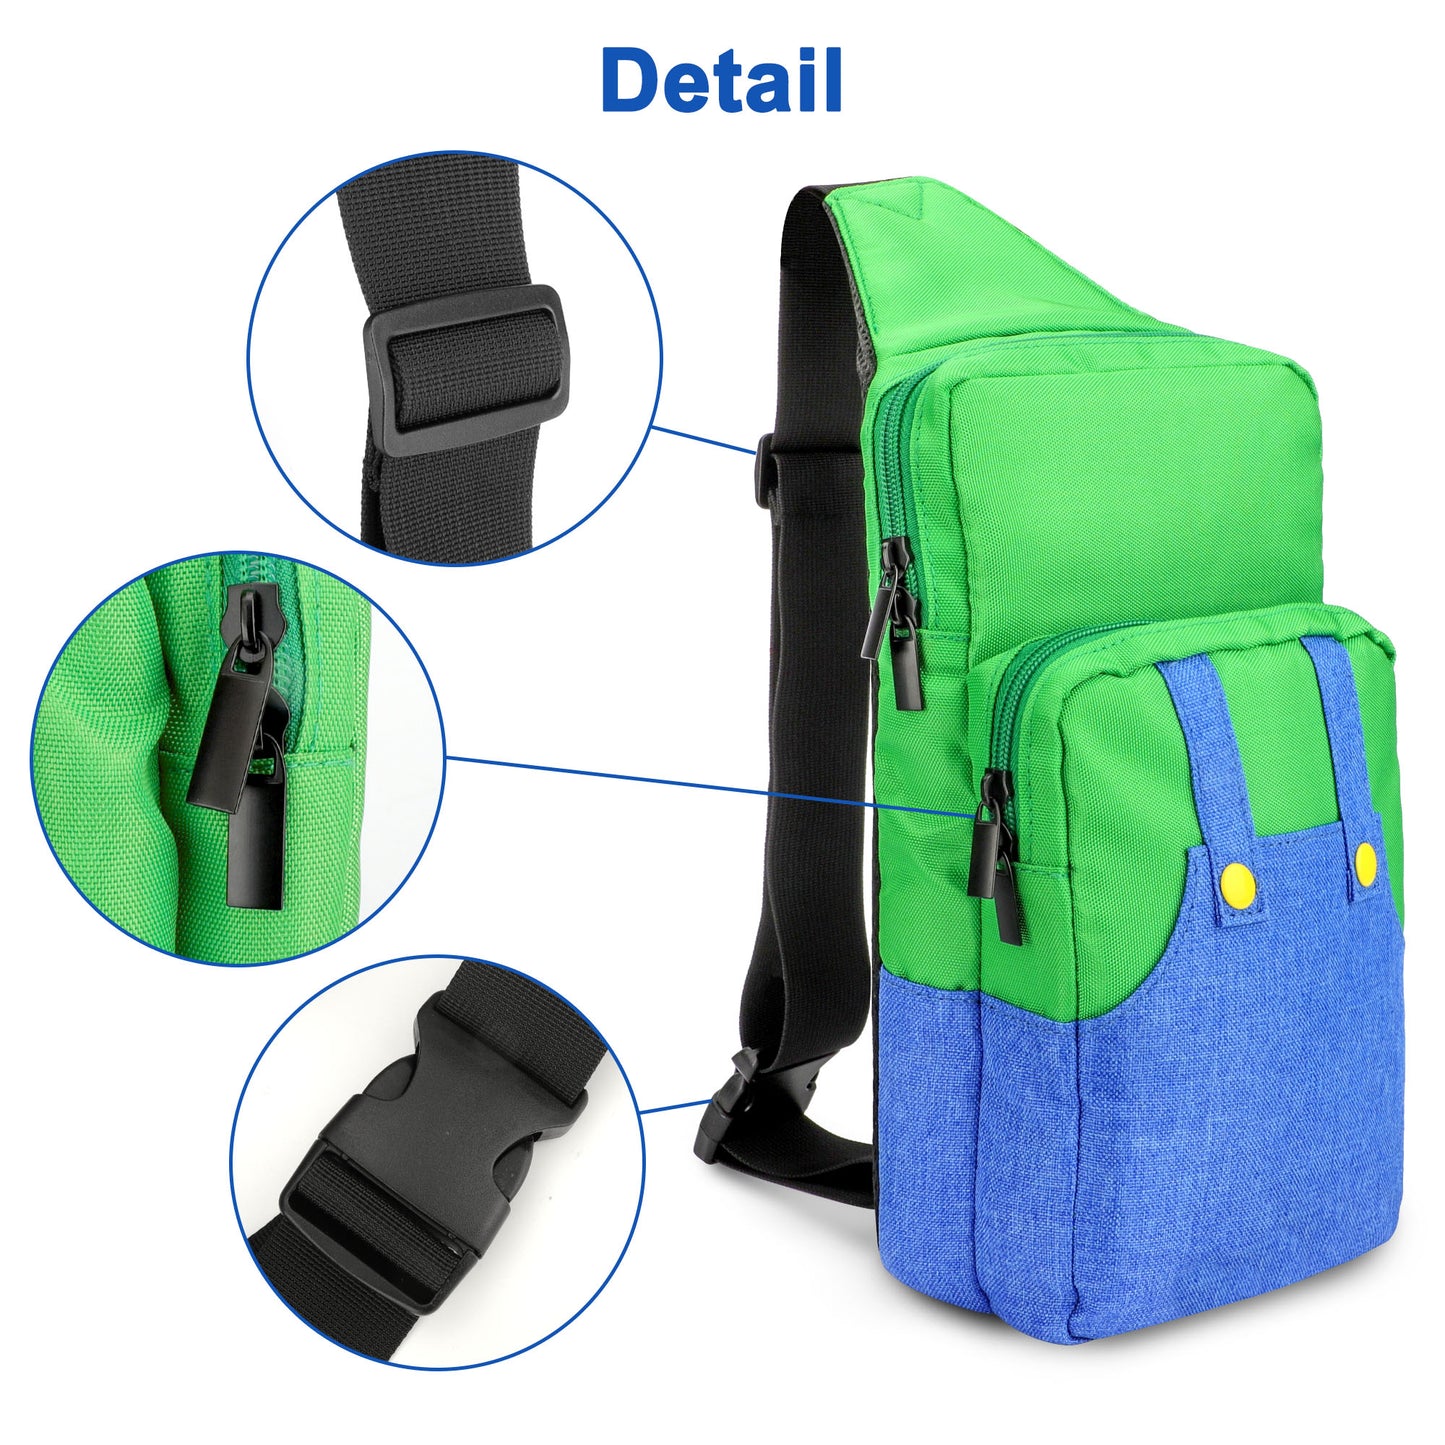 Shoulder Crossbody Storage Bag - For Nintendo Switch/Lite/OLED/Steam Deck Portable Travel Chest Bags,Large Capacity, Anti-Shock Protection, Fashionable Design, Ideal for Travelers and Gamers(Green & Blue)